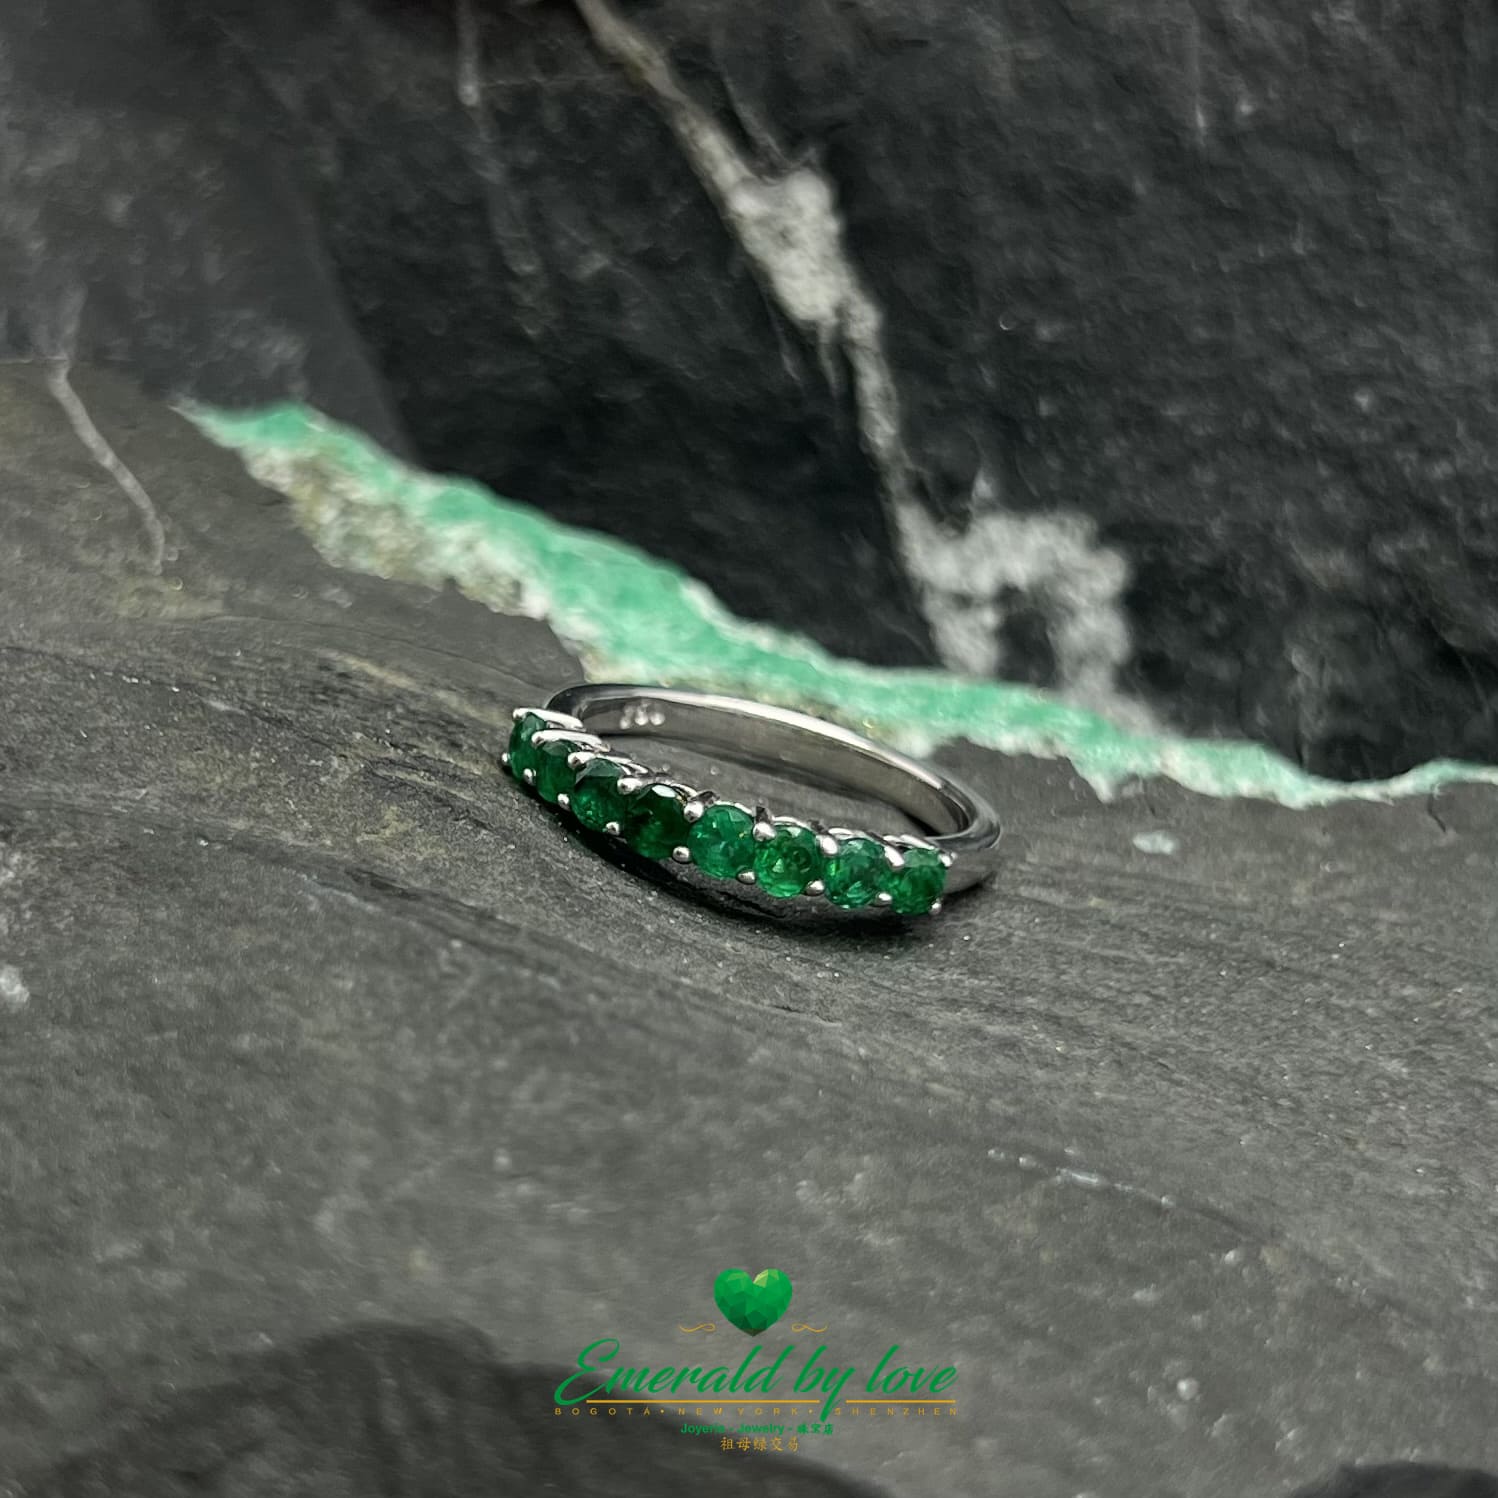 Round Emerald Band in White Gold